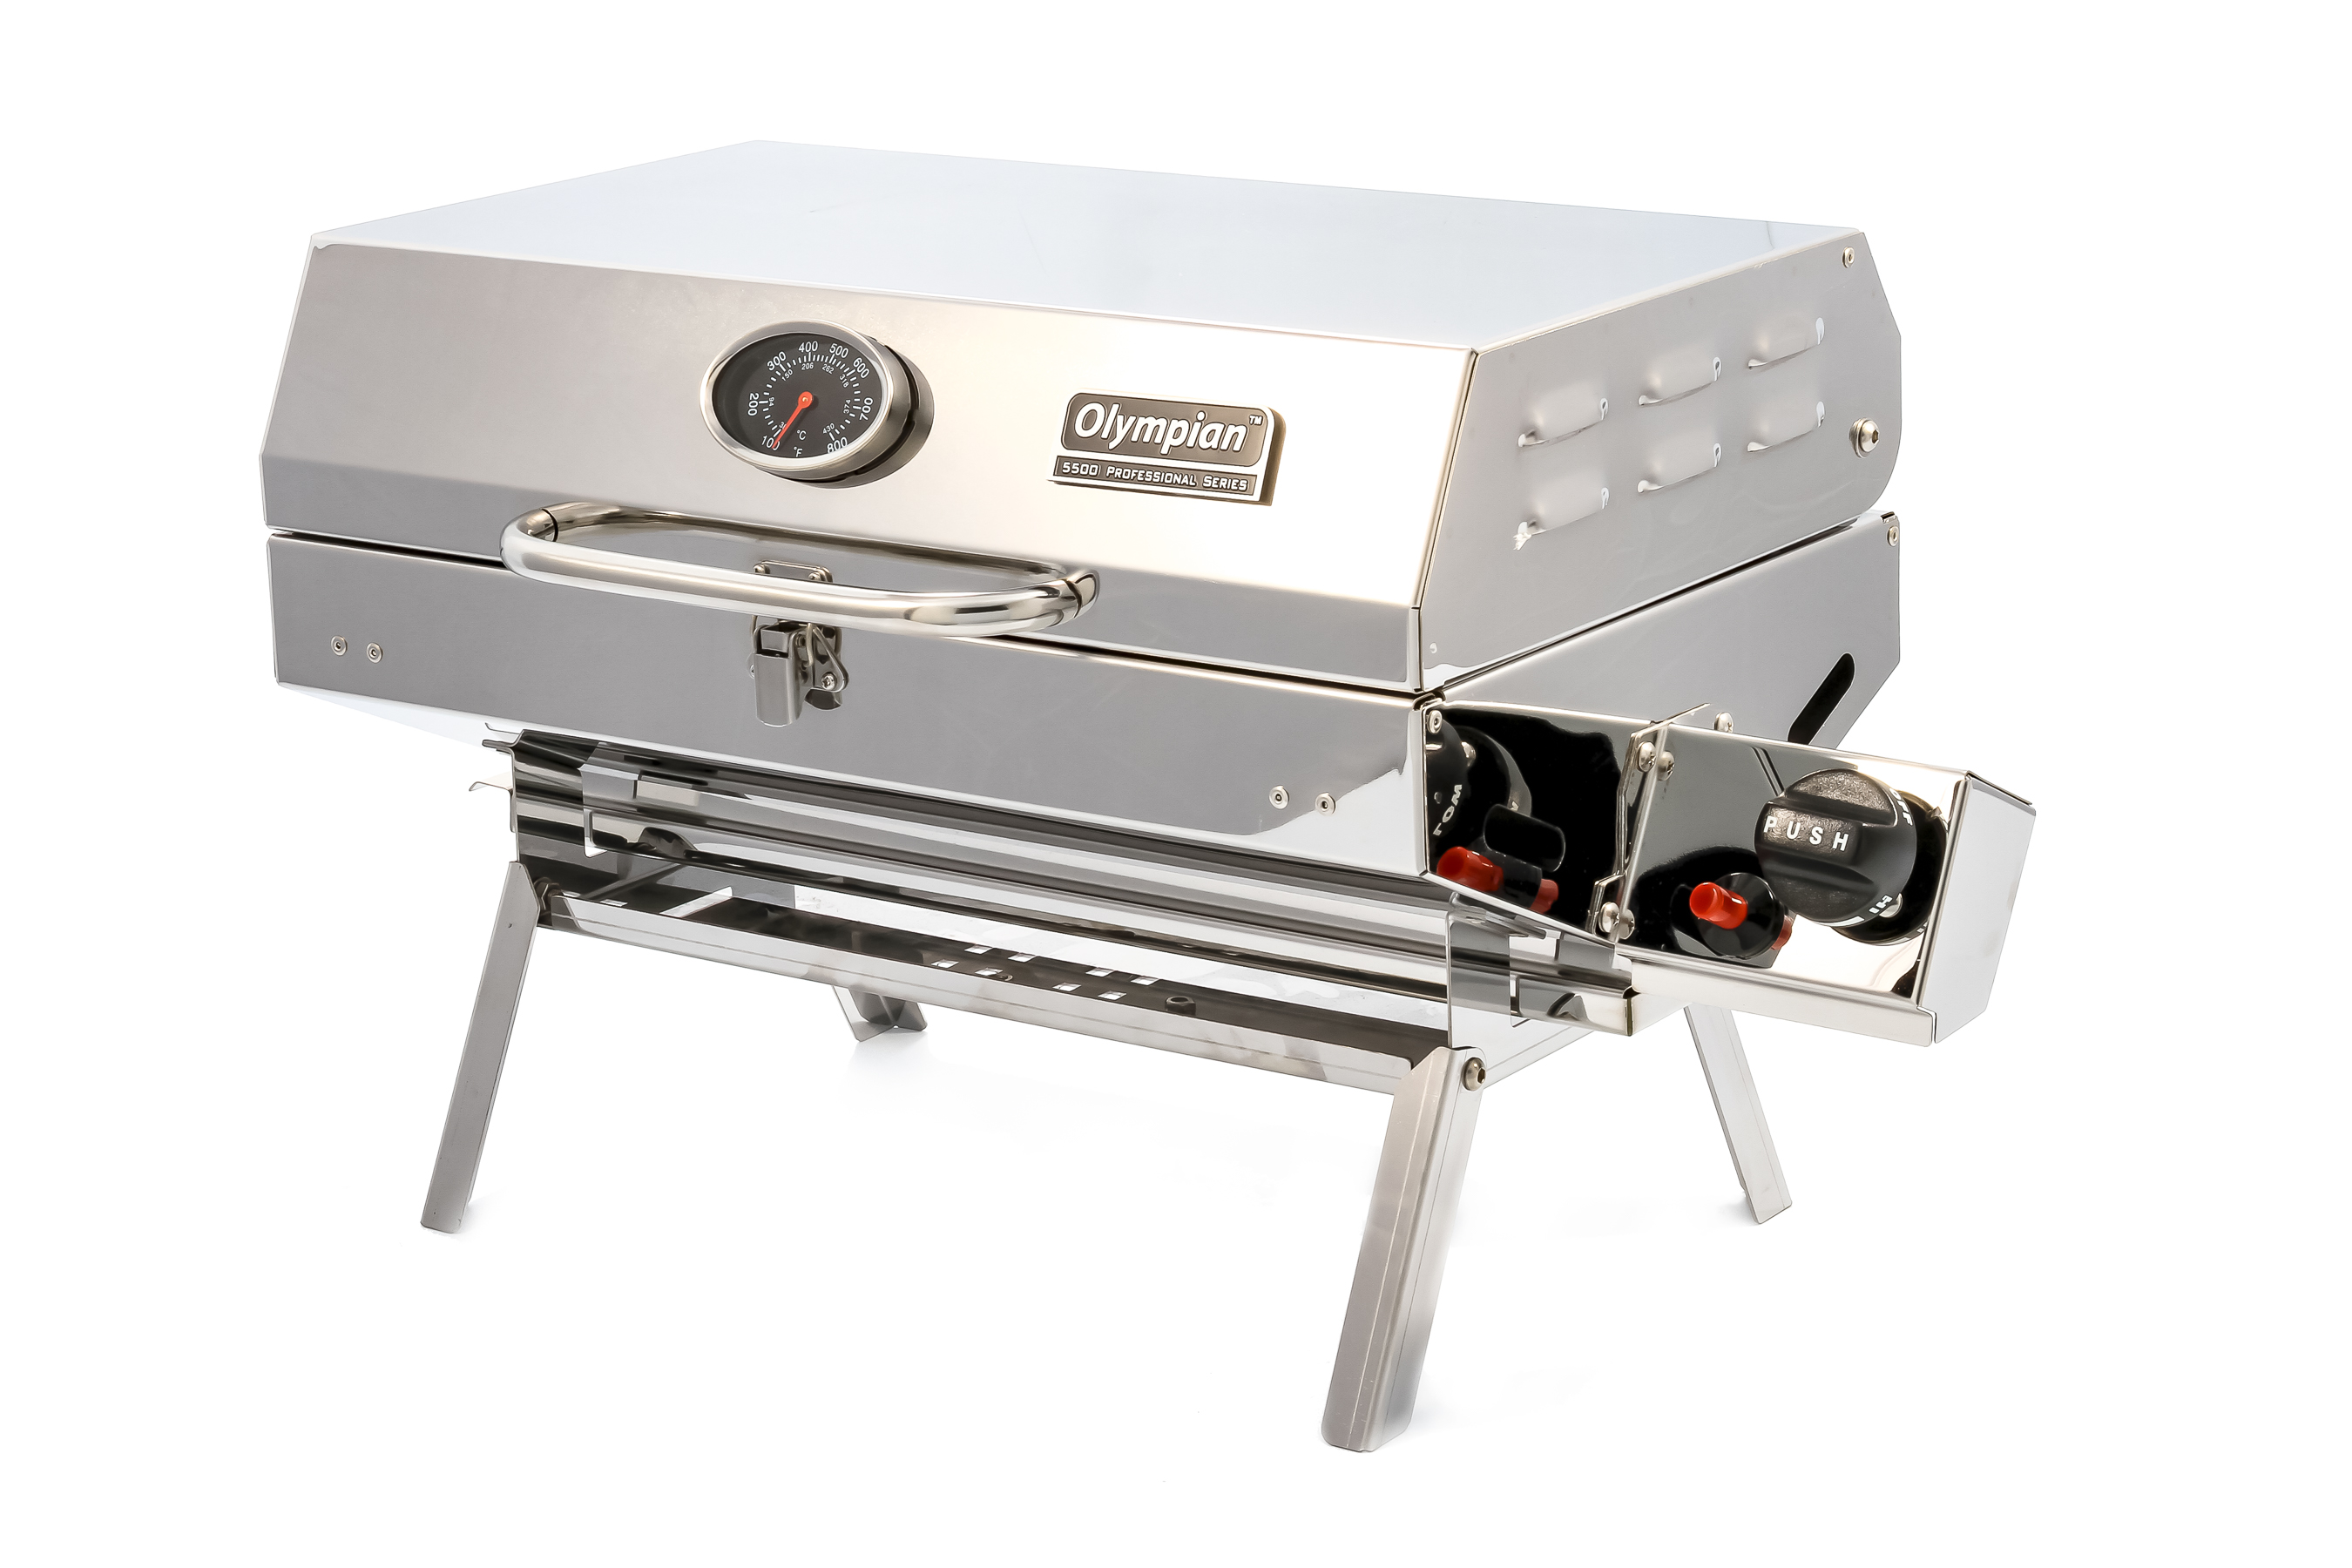 Camco 57305 Olympian 5500 Stainless Steel Portable Gas Grill for RV and Outdoor Use - image 2 of 17